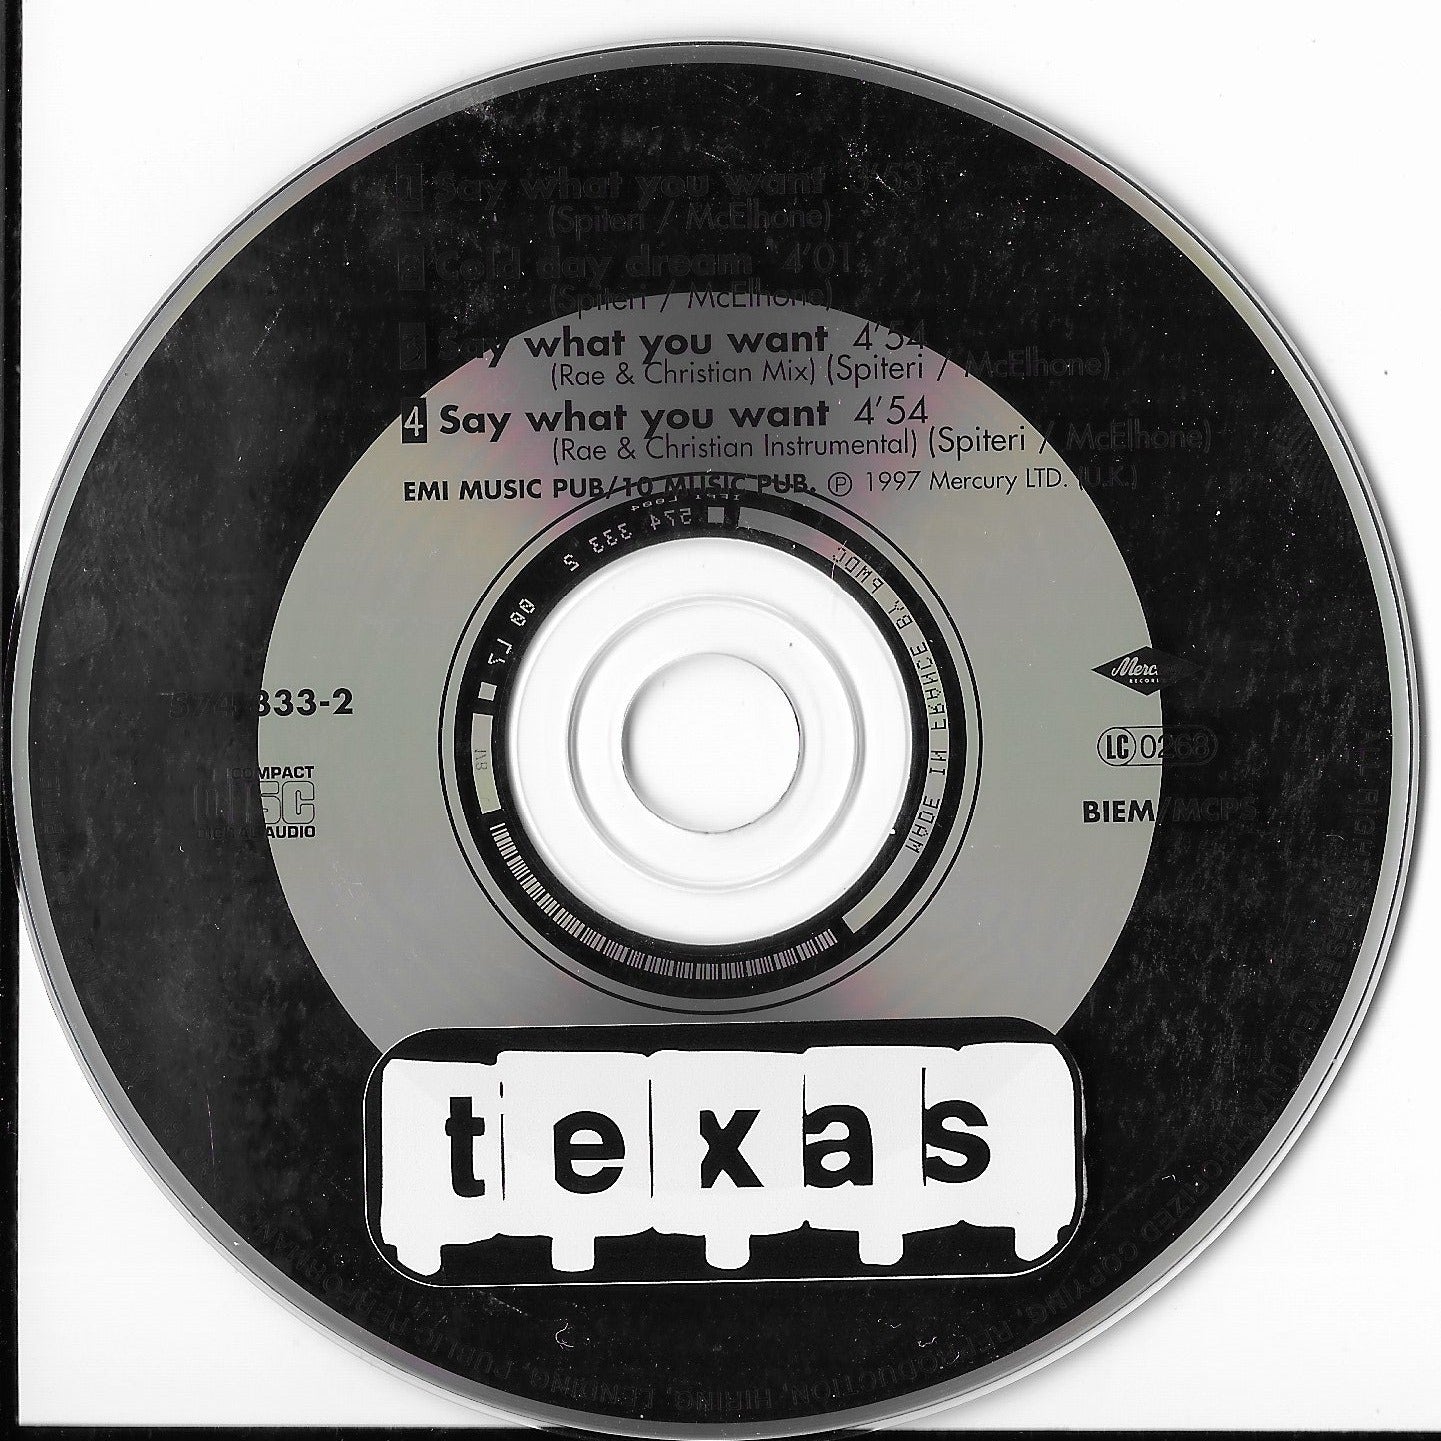 TEXAS - Say What You Want